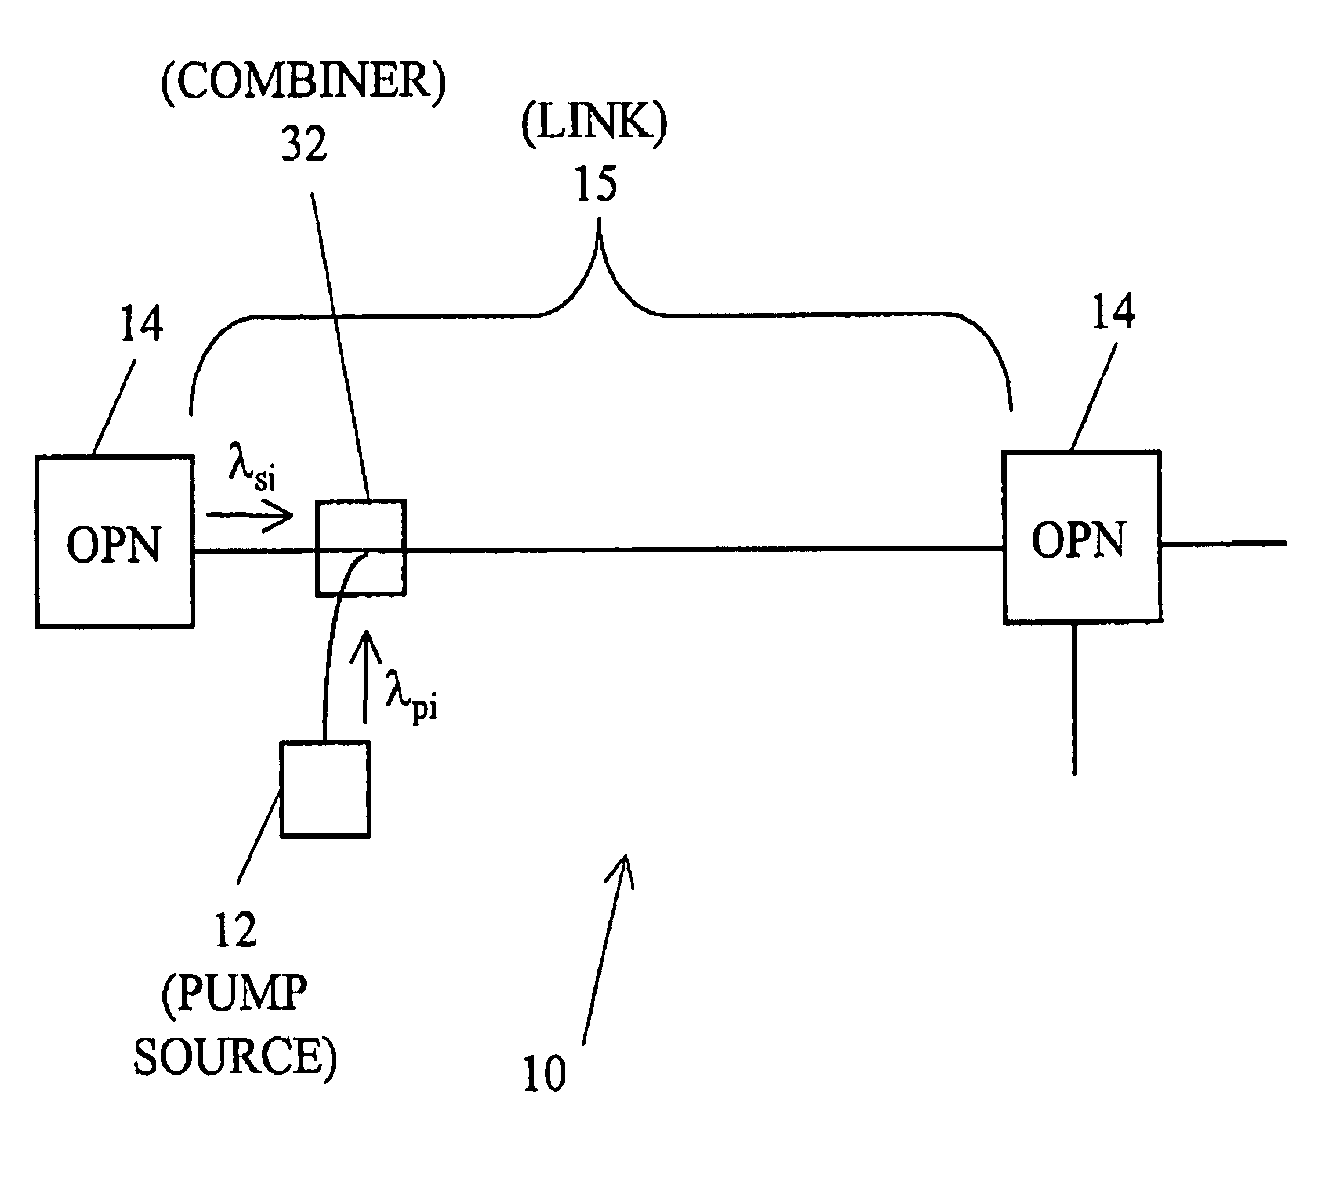 Optical transmission systems including optical amplifiers, apparatuses and methods